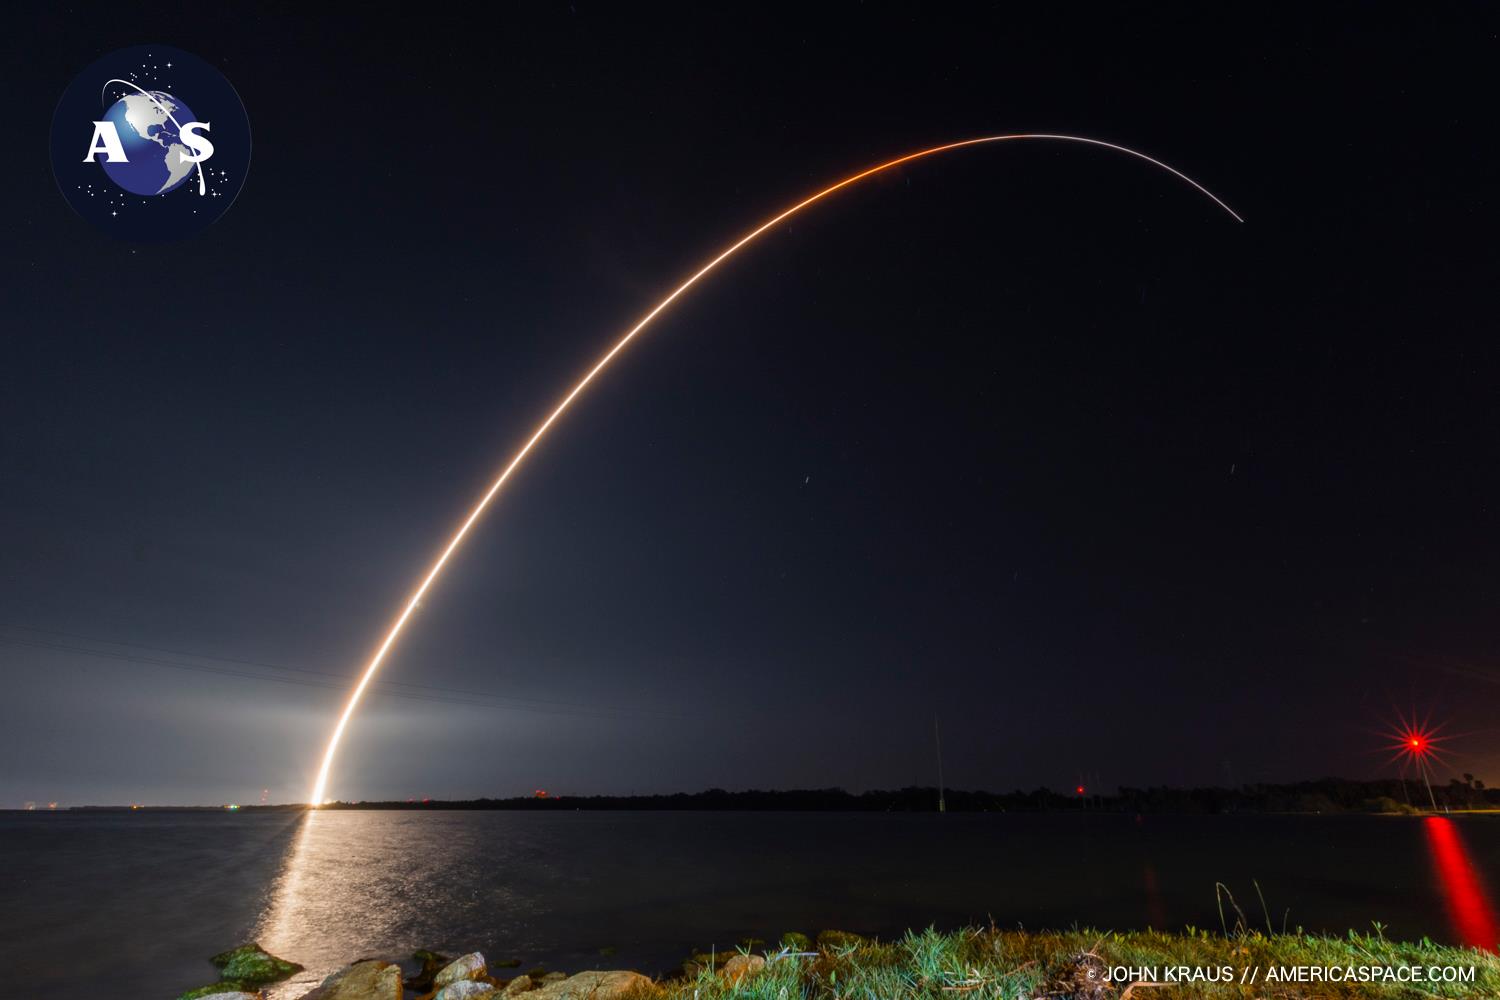 Picture-perfect liftoff last night for United Launch Alliance & their Delta-IV rocket with the eighth U.S. Air Force / Boeing Wideband Global Satcom satellite (WGS-8), now en-route to a 22,300-mile geosynchronous orbit. Photo Credit: John Kraus / AmericaSpace